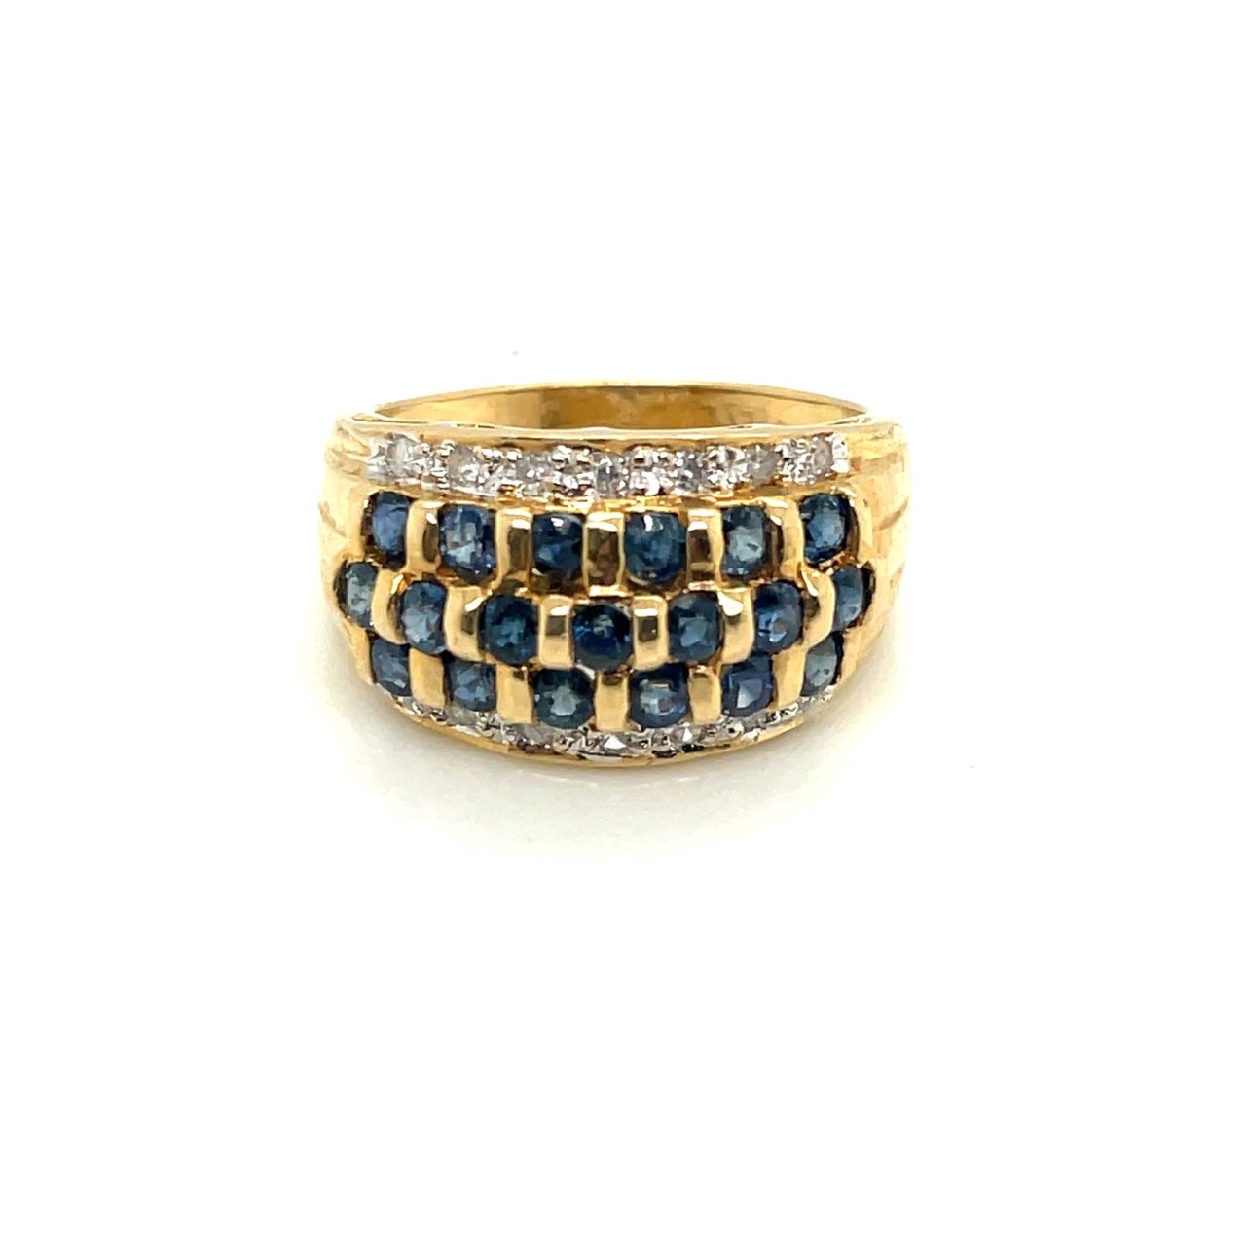 14K Yellow Gold Band with Three Rows of Round Sapphires; FLanked by One Row of Diamonds on Each Side

Size 6.75